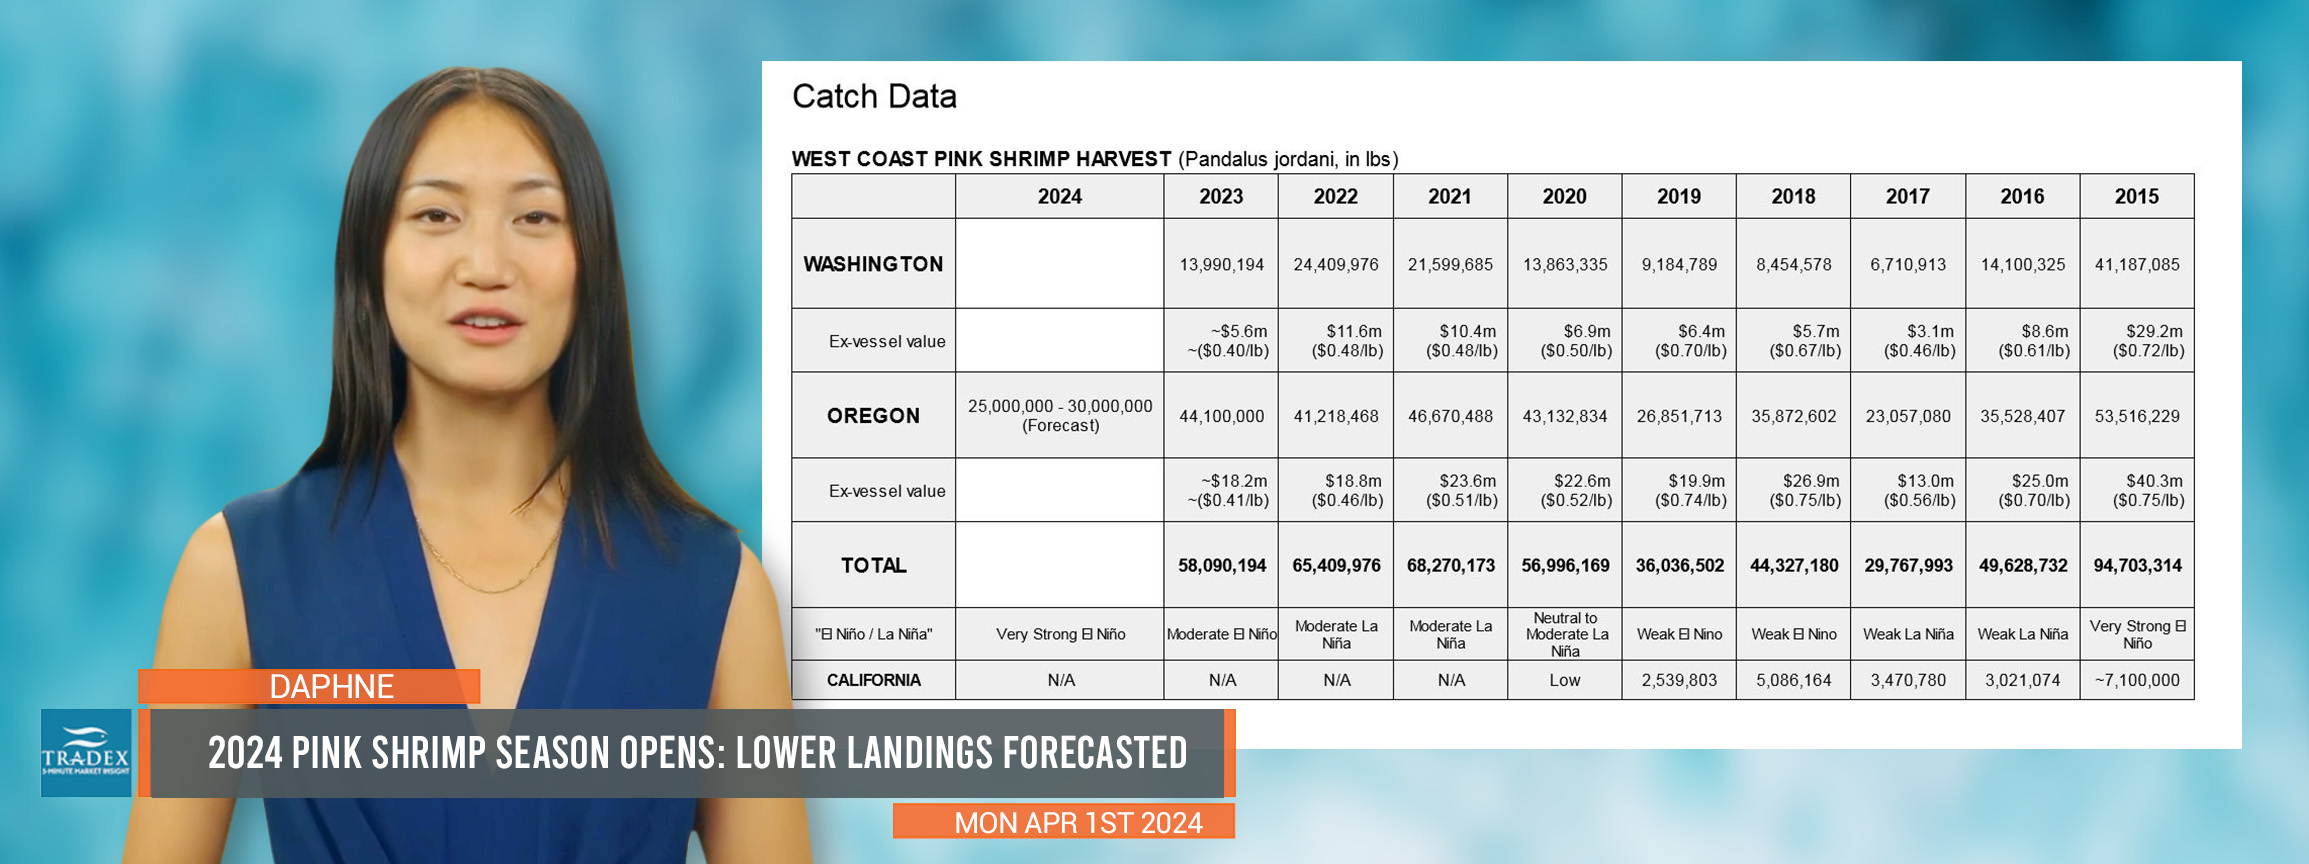 Pink Shrimp Season Opens: Lower Landings Forecasted could Lead to Upward Price